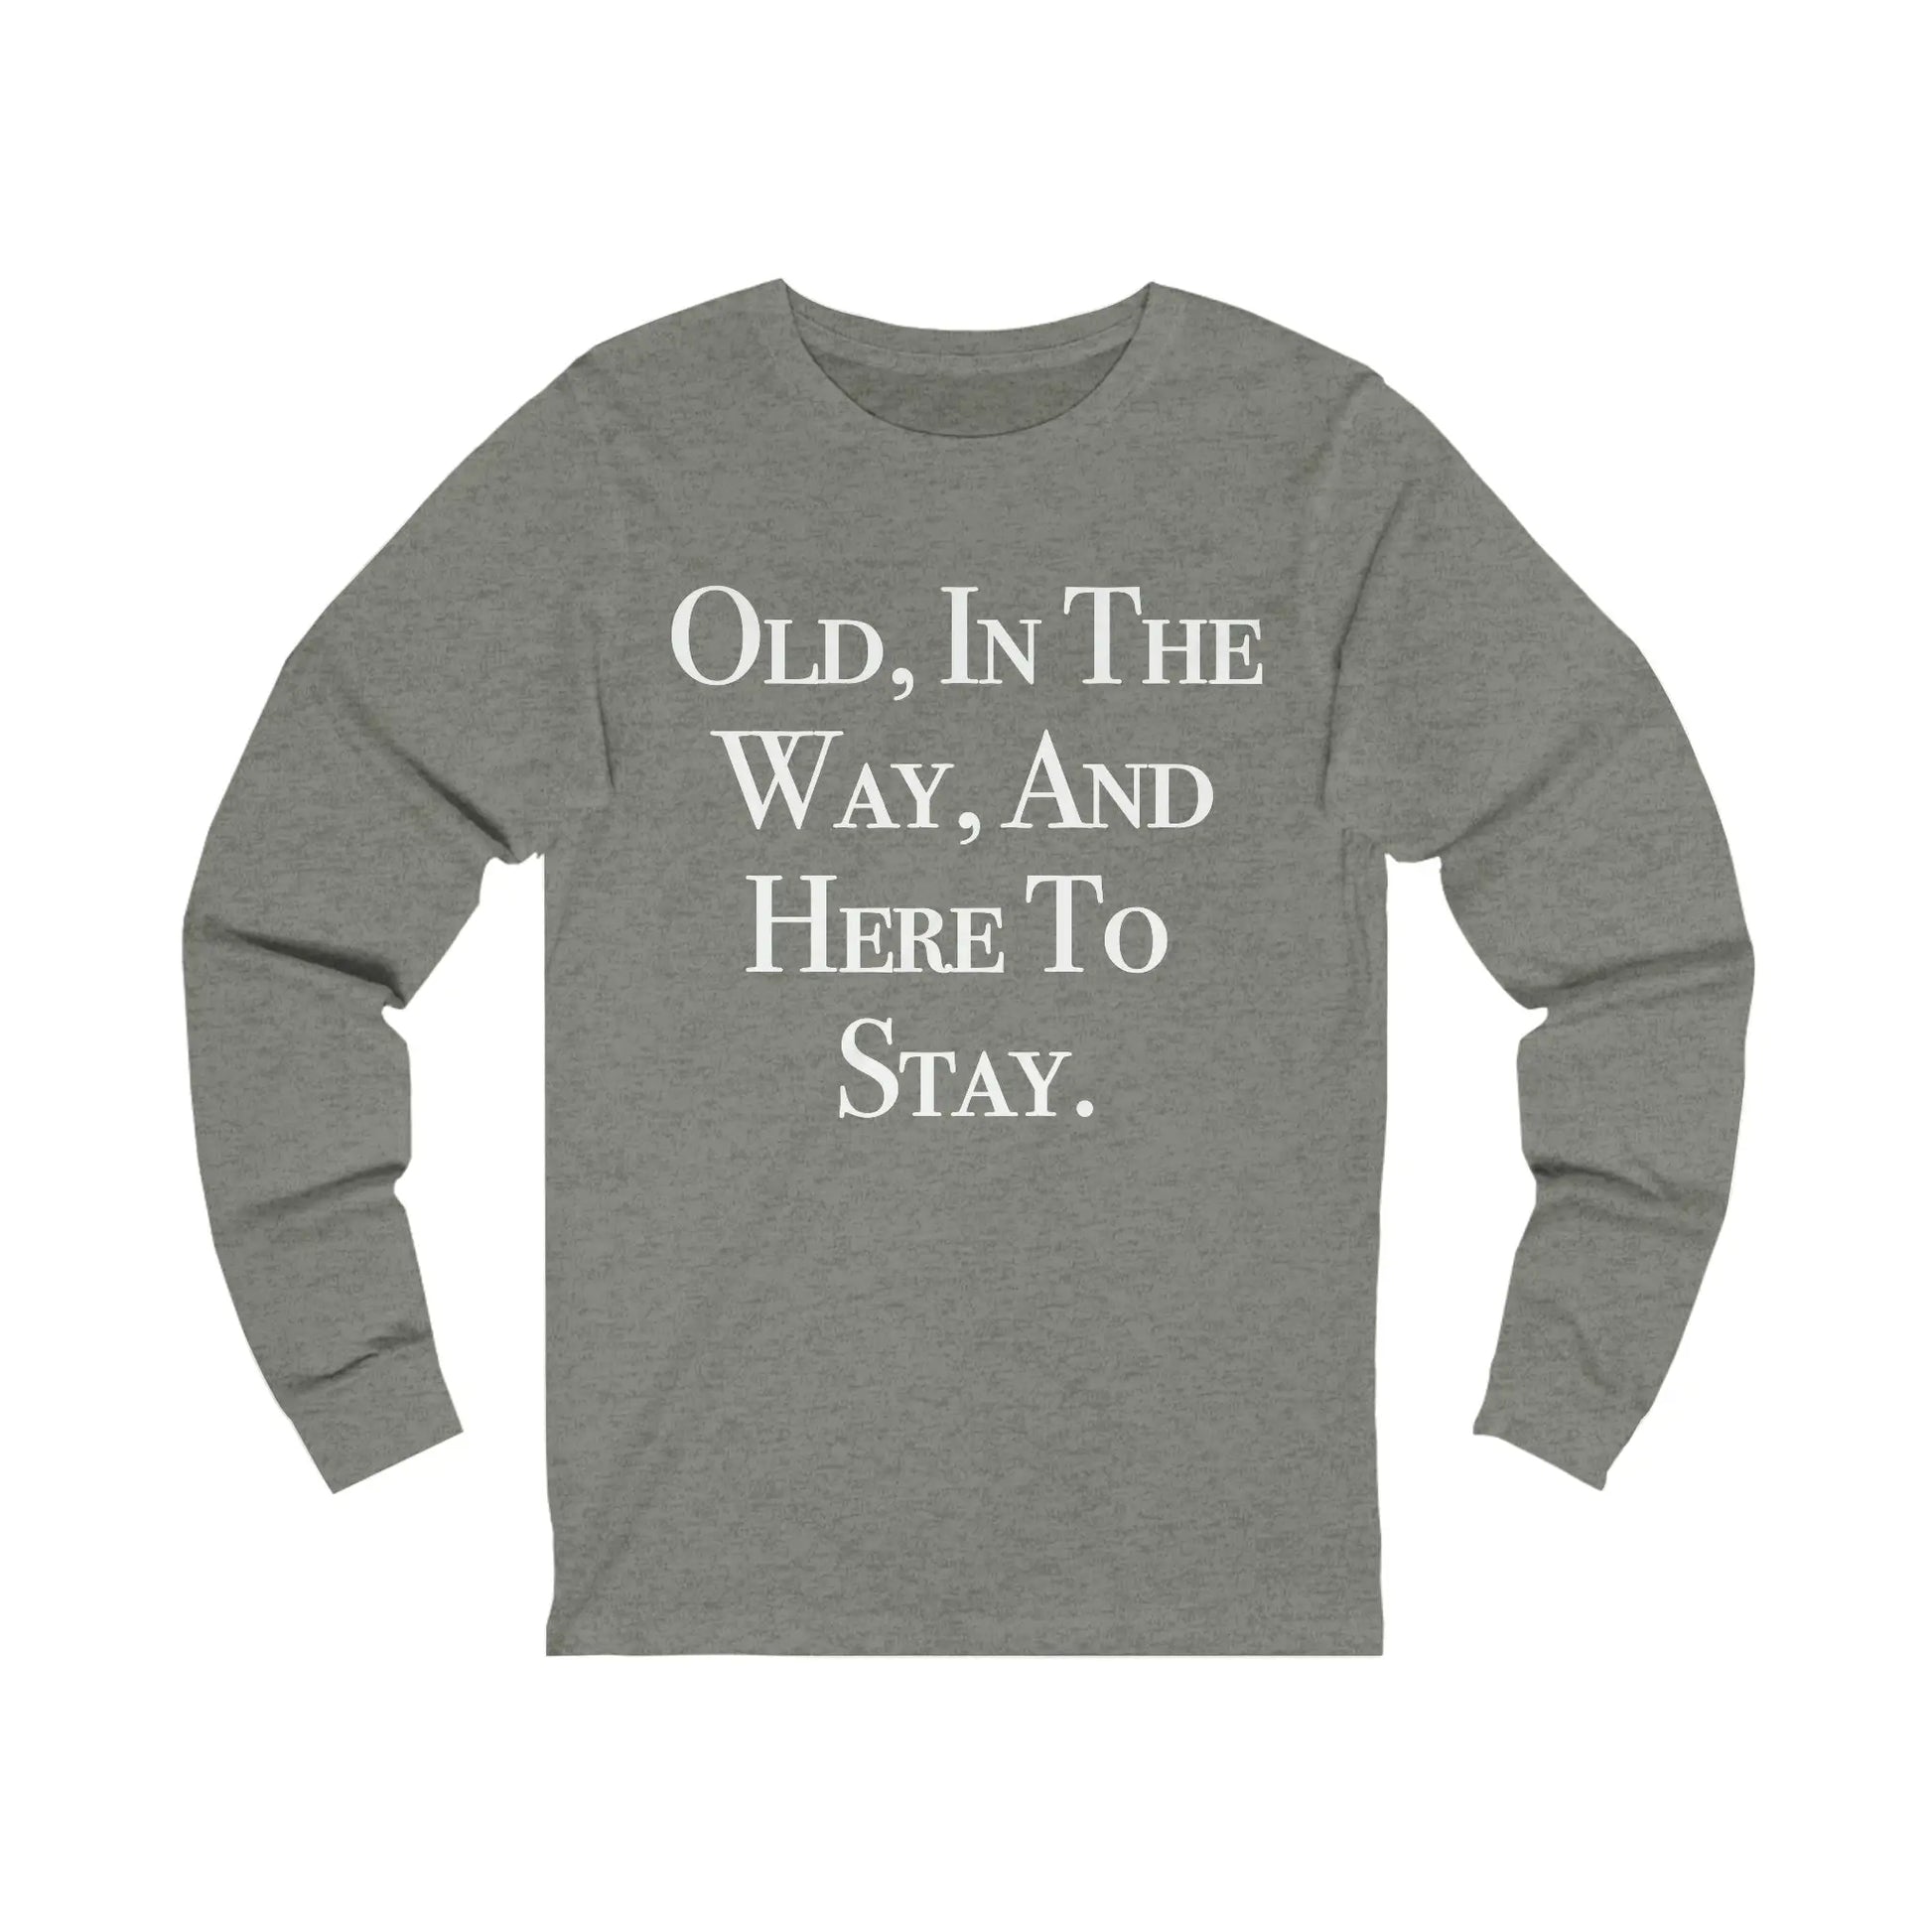 Here To Stay Men's Jersey Long Sleeve Tee - Wicked Tees